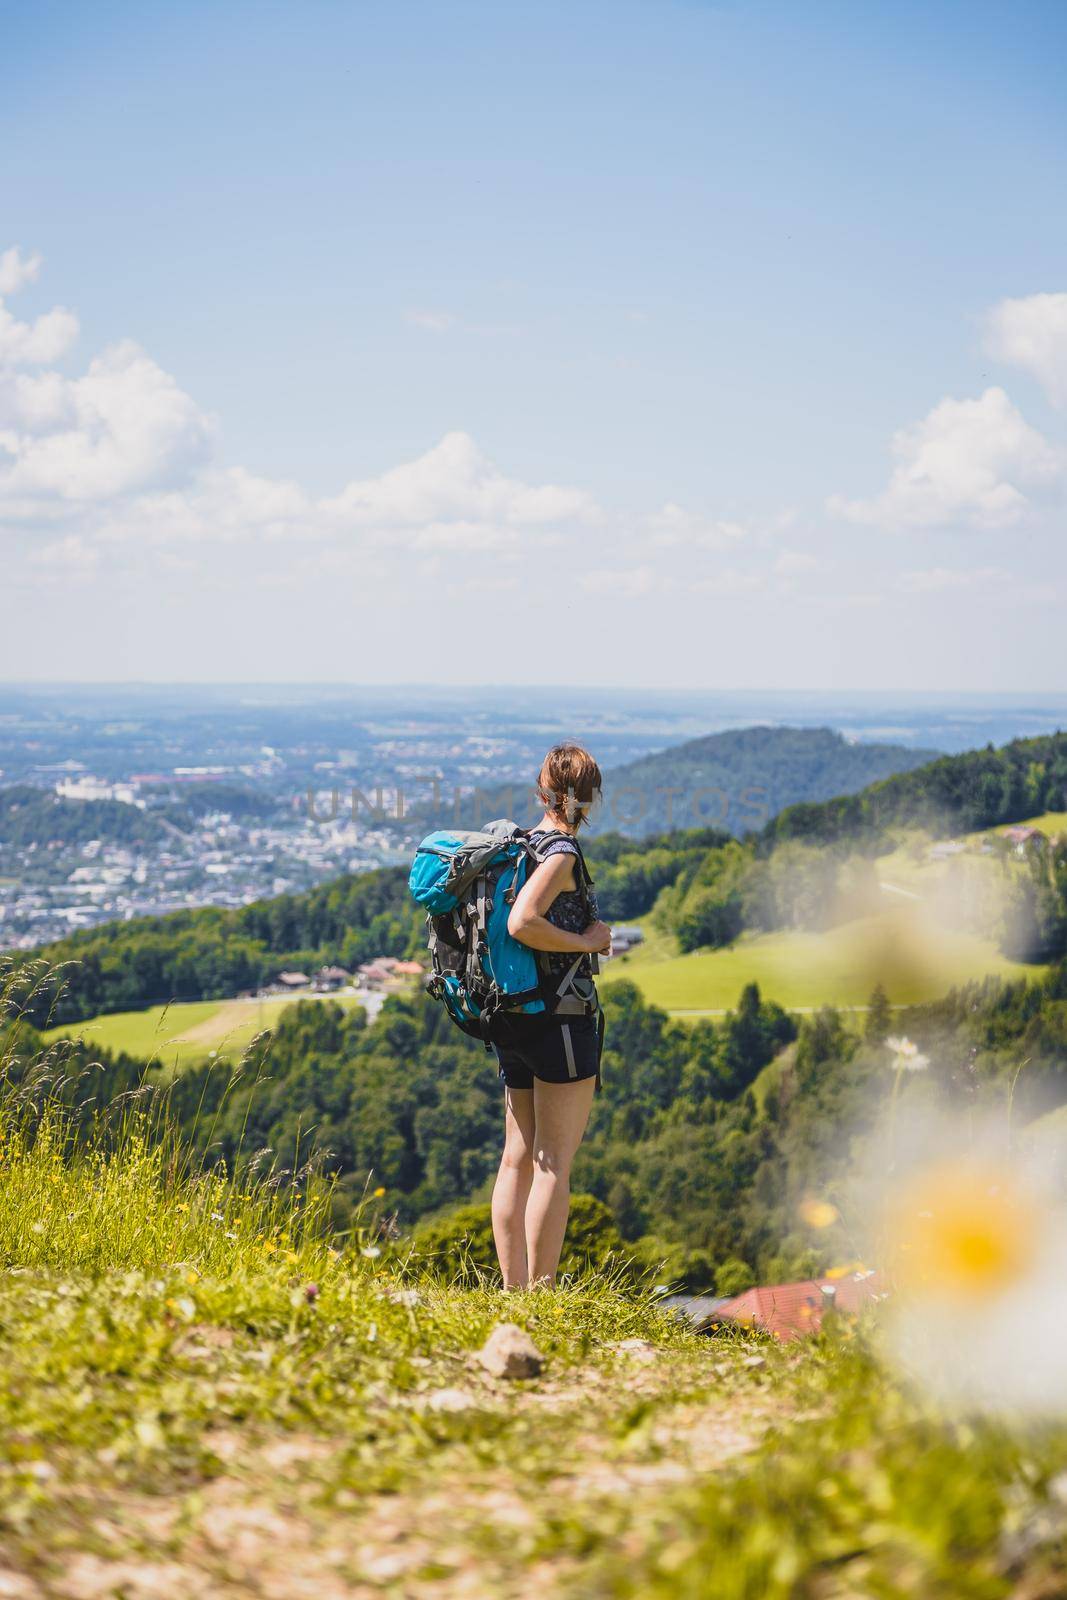 Enjoying the idyllic mountain landscape on Gaisberg: Girl is standing on idyllic meadow and enjoying the view over the far away city of Salzburg by Daxenbichler